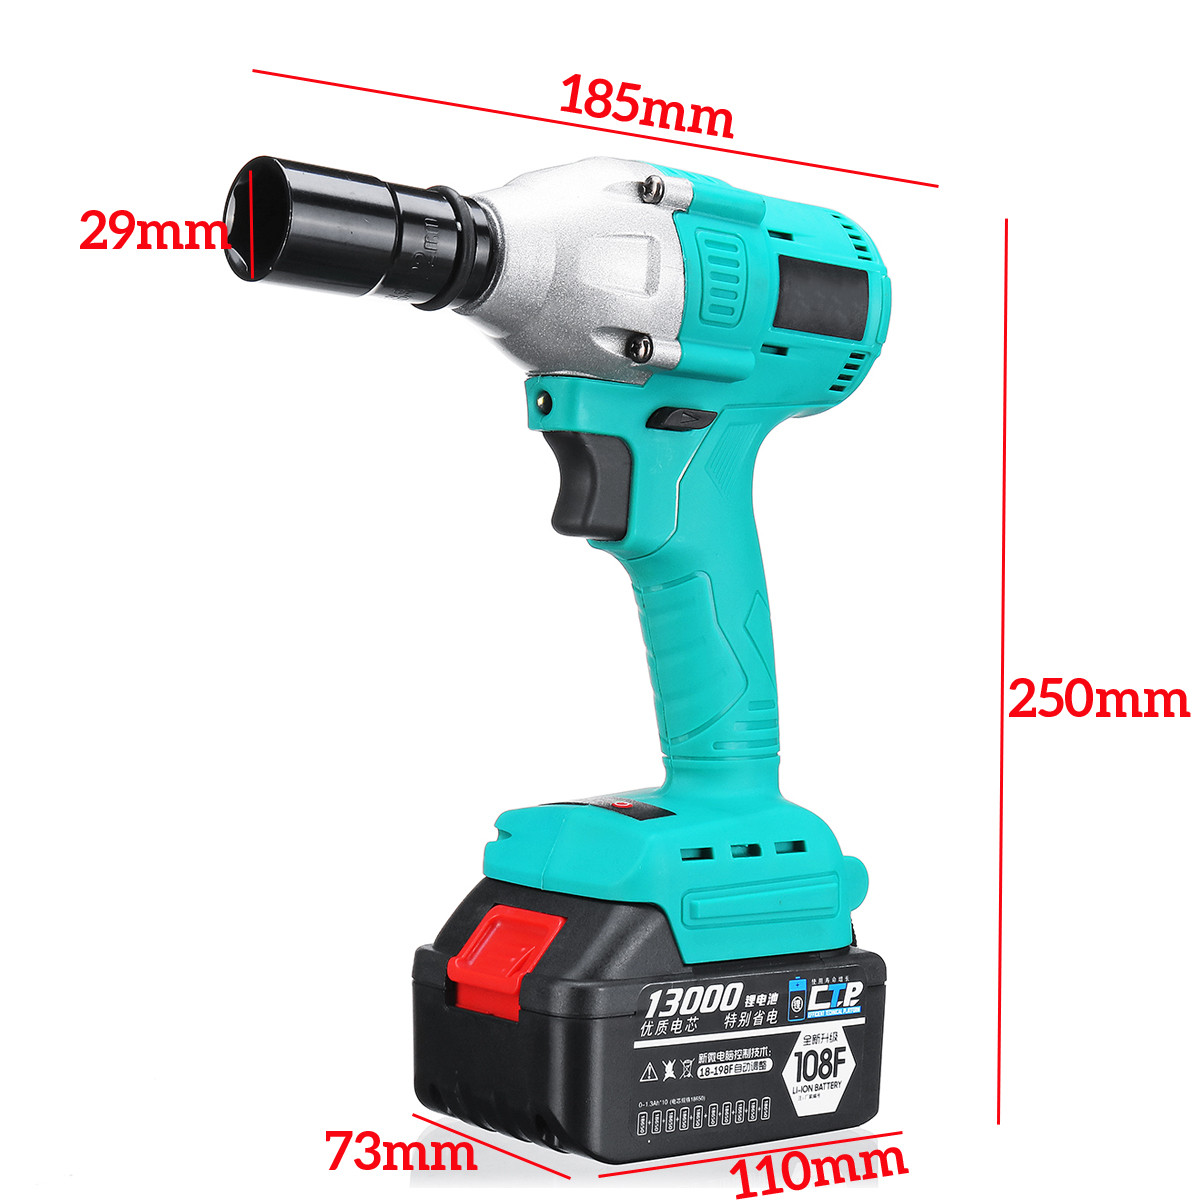 100-240V-Li-ion-Electric-Wrench-Brushless-Impact-Wrench-Wood-Work-Power-Tool-with-2-Battery-1391023-7